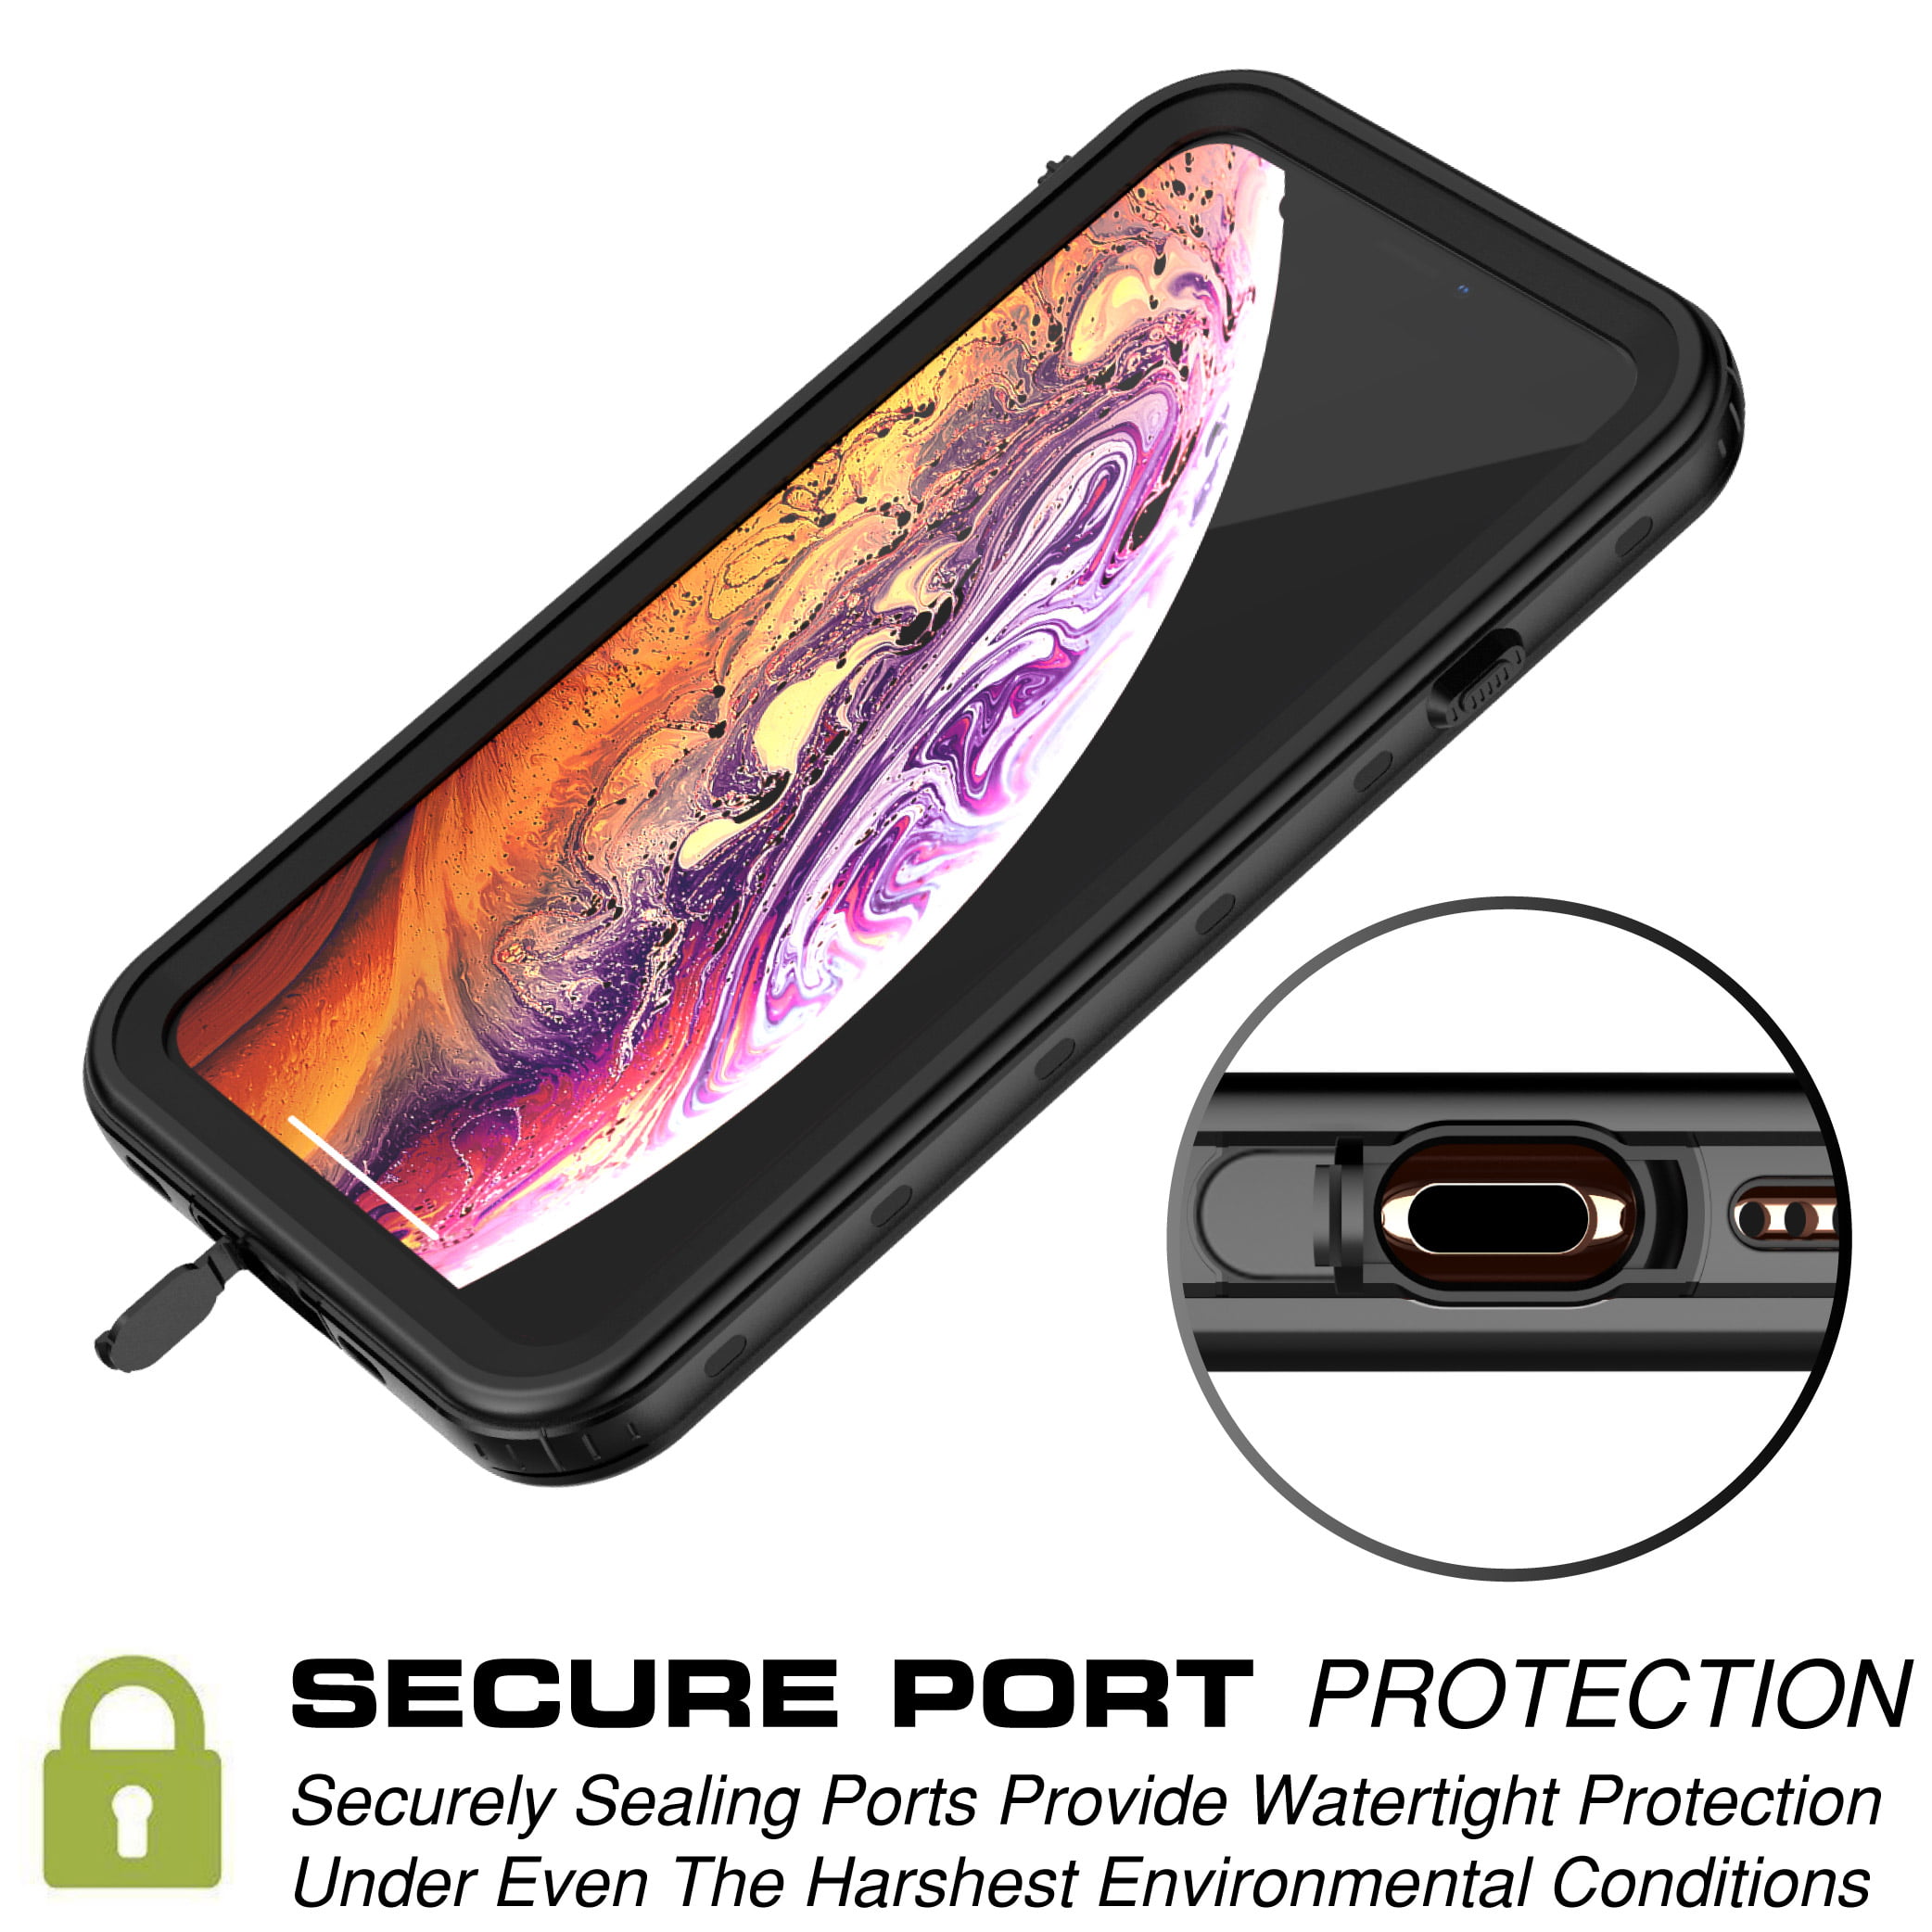 Waterproof & shockproof case for iPhone Xs Max - 360° optimal protection